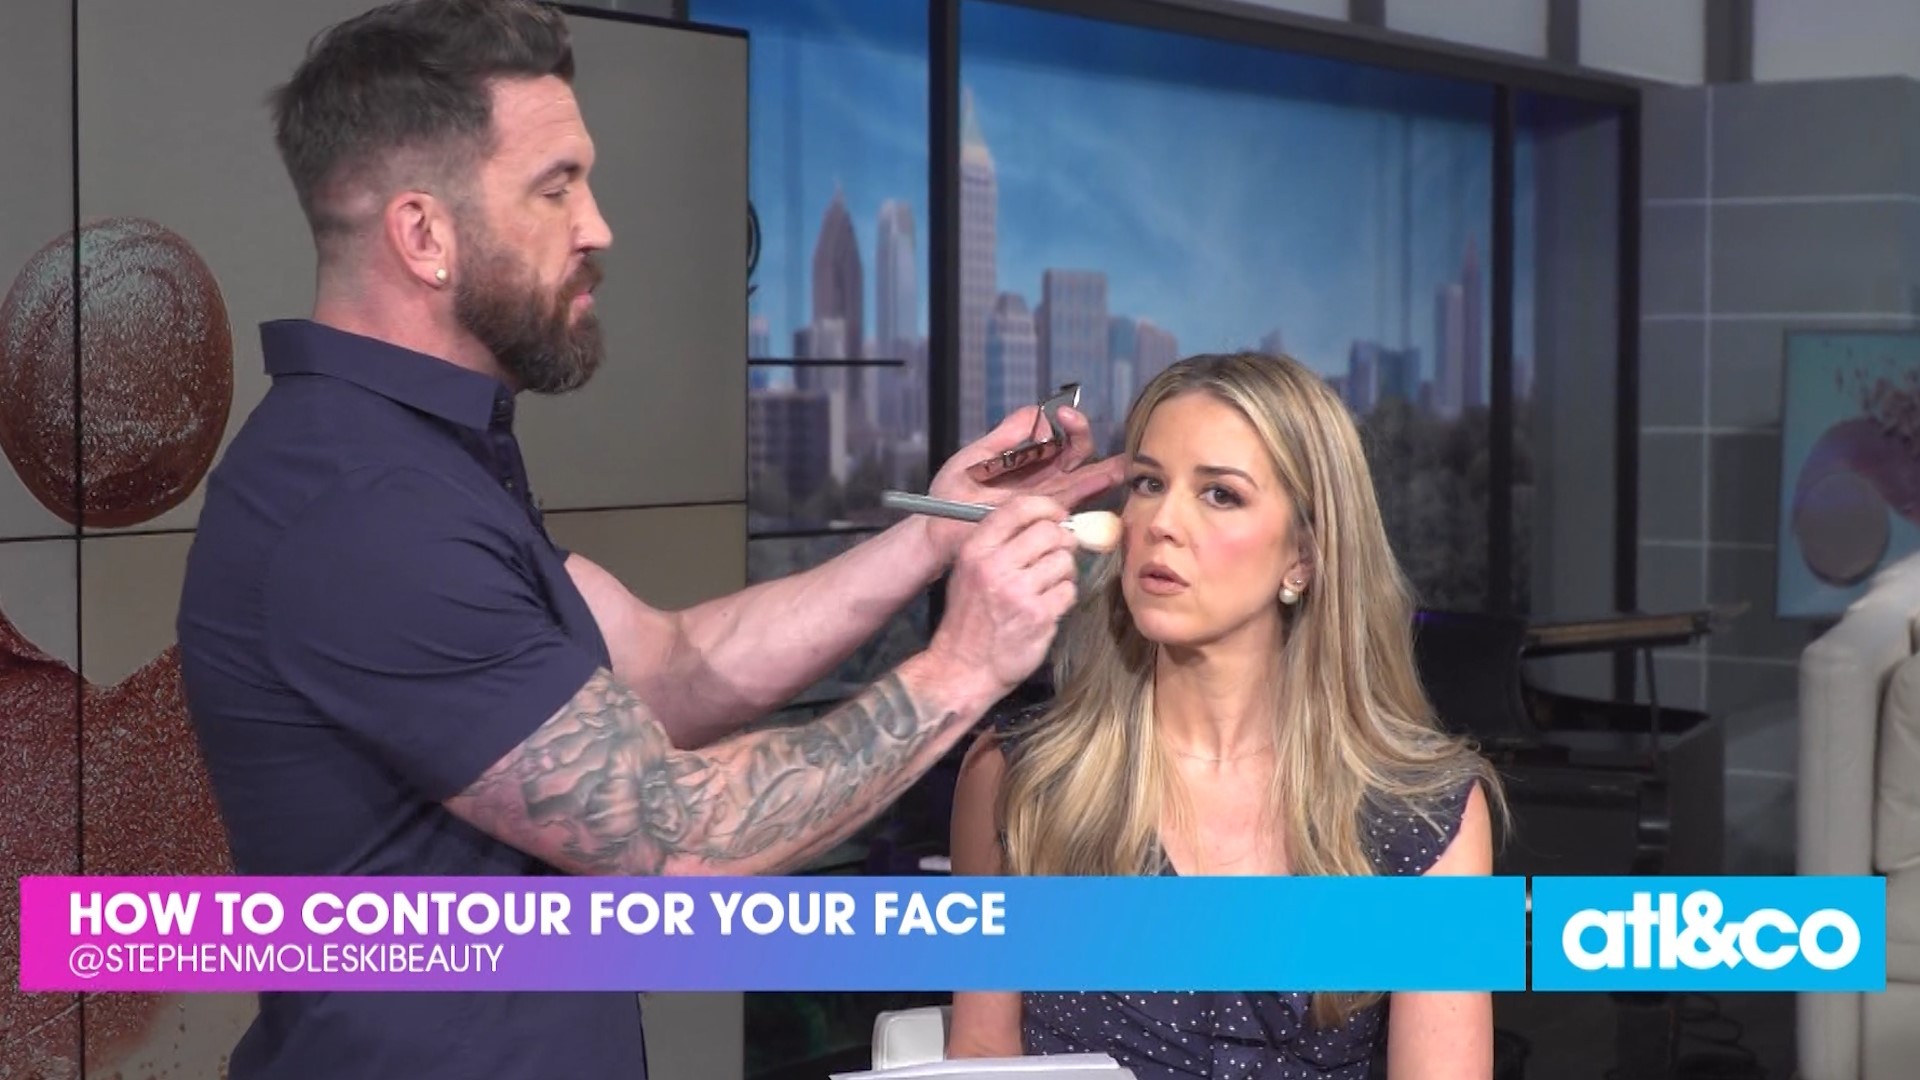 Perfect your makeup routine with tips from celebrity makeup artist Stephen Moleski.